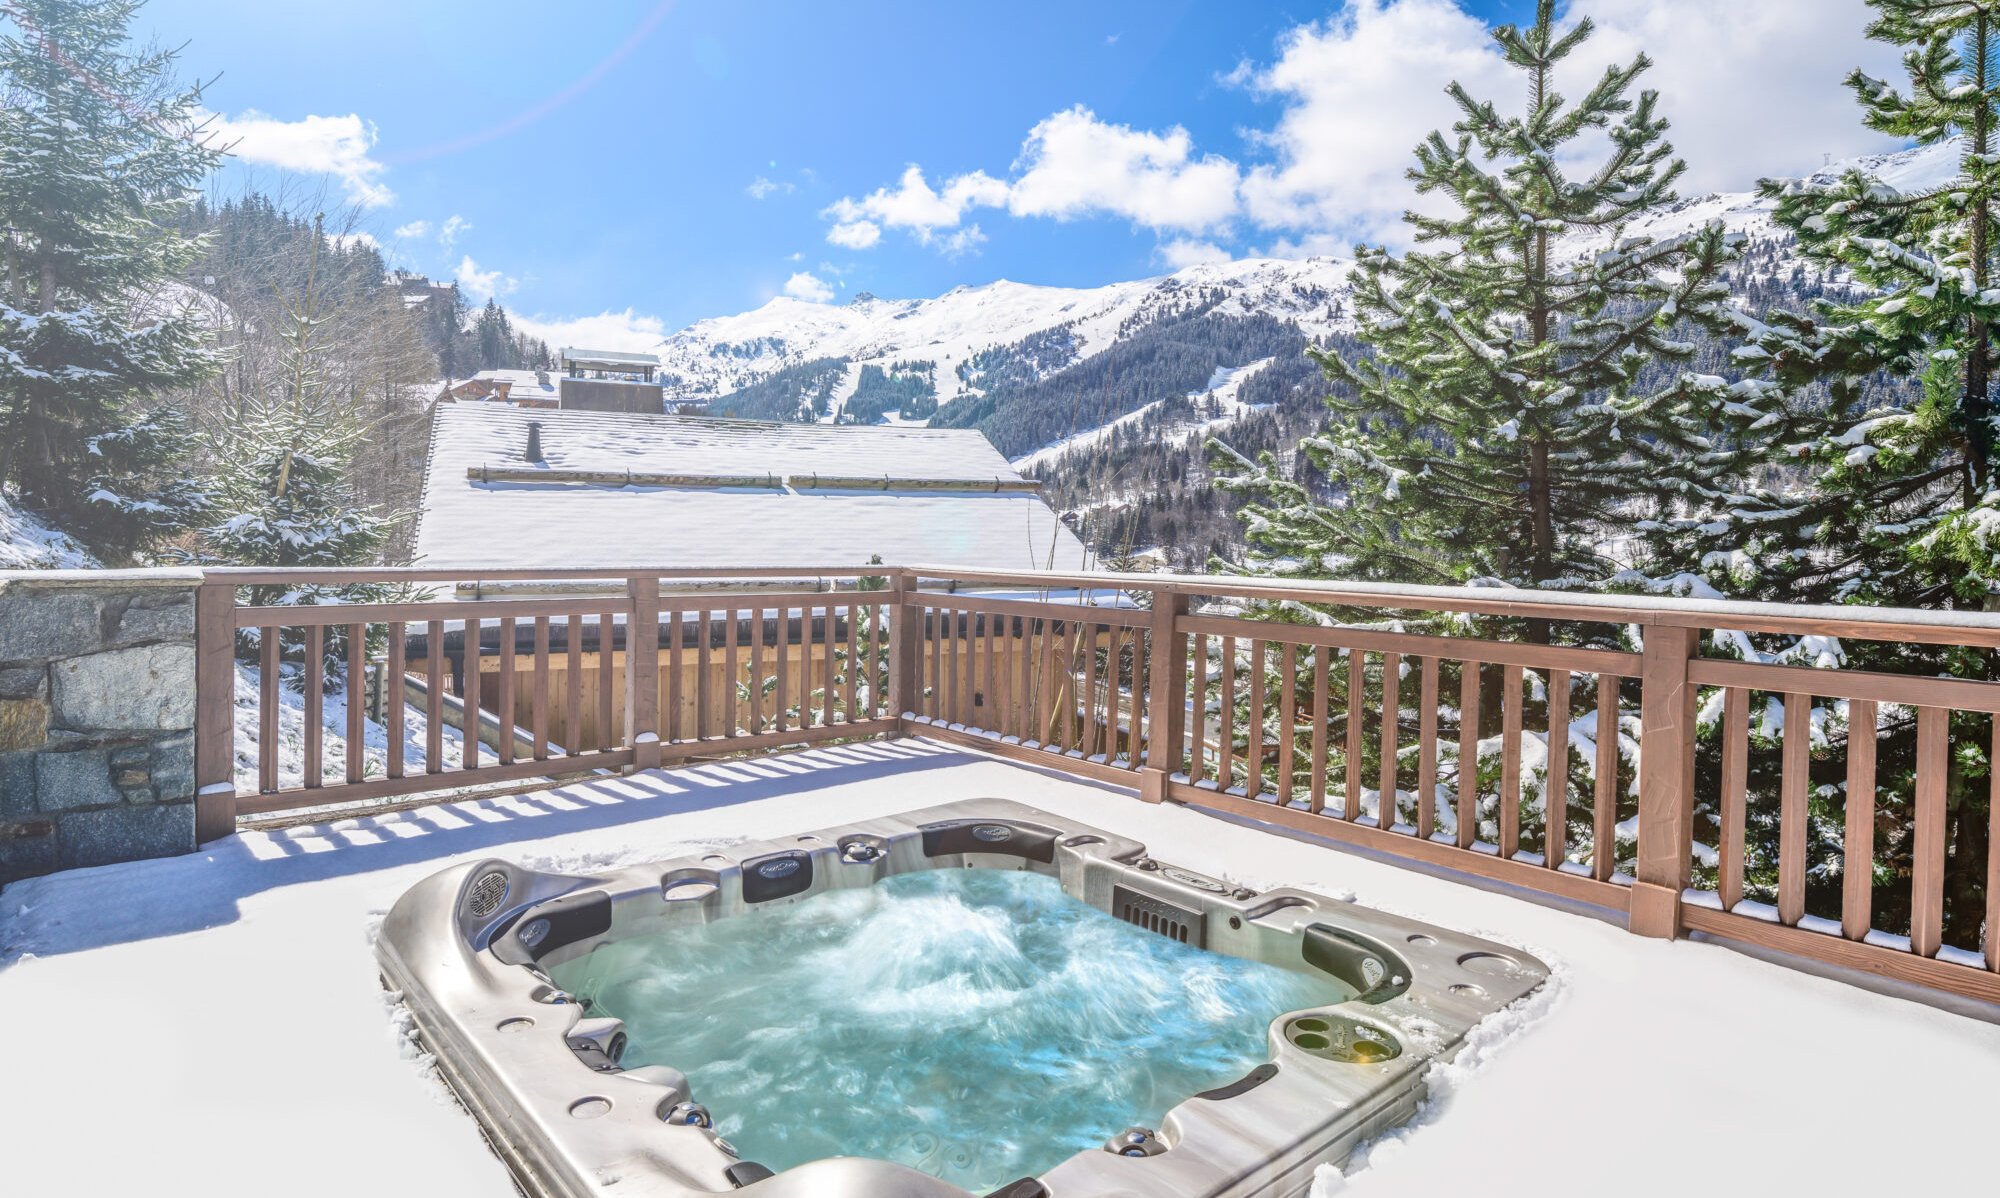 The outdoor Hot Tub on the Terrace at Chalet Amarena Meribel